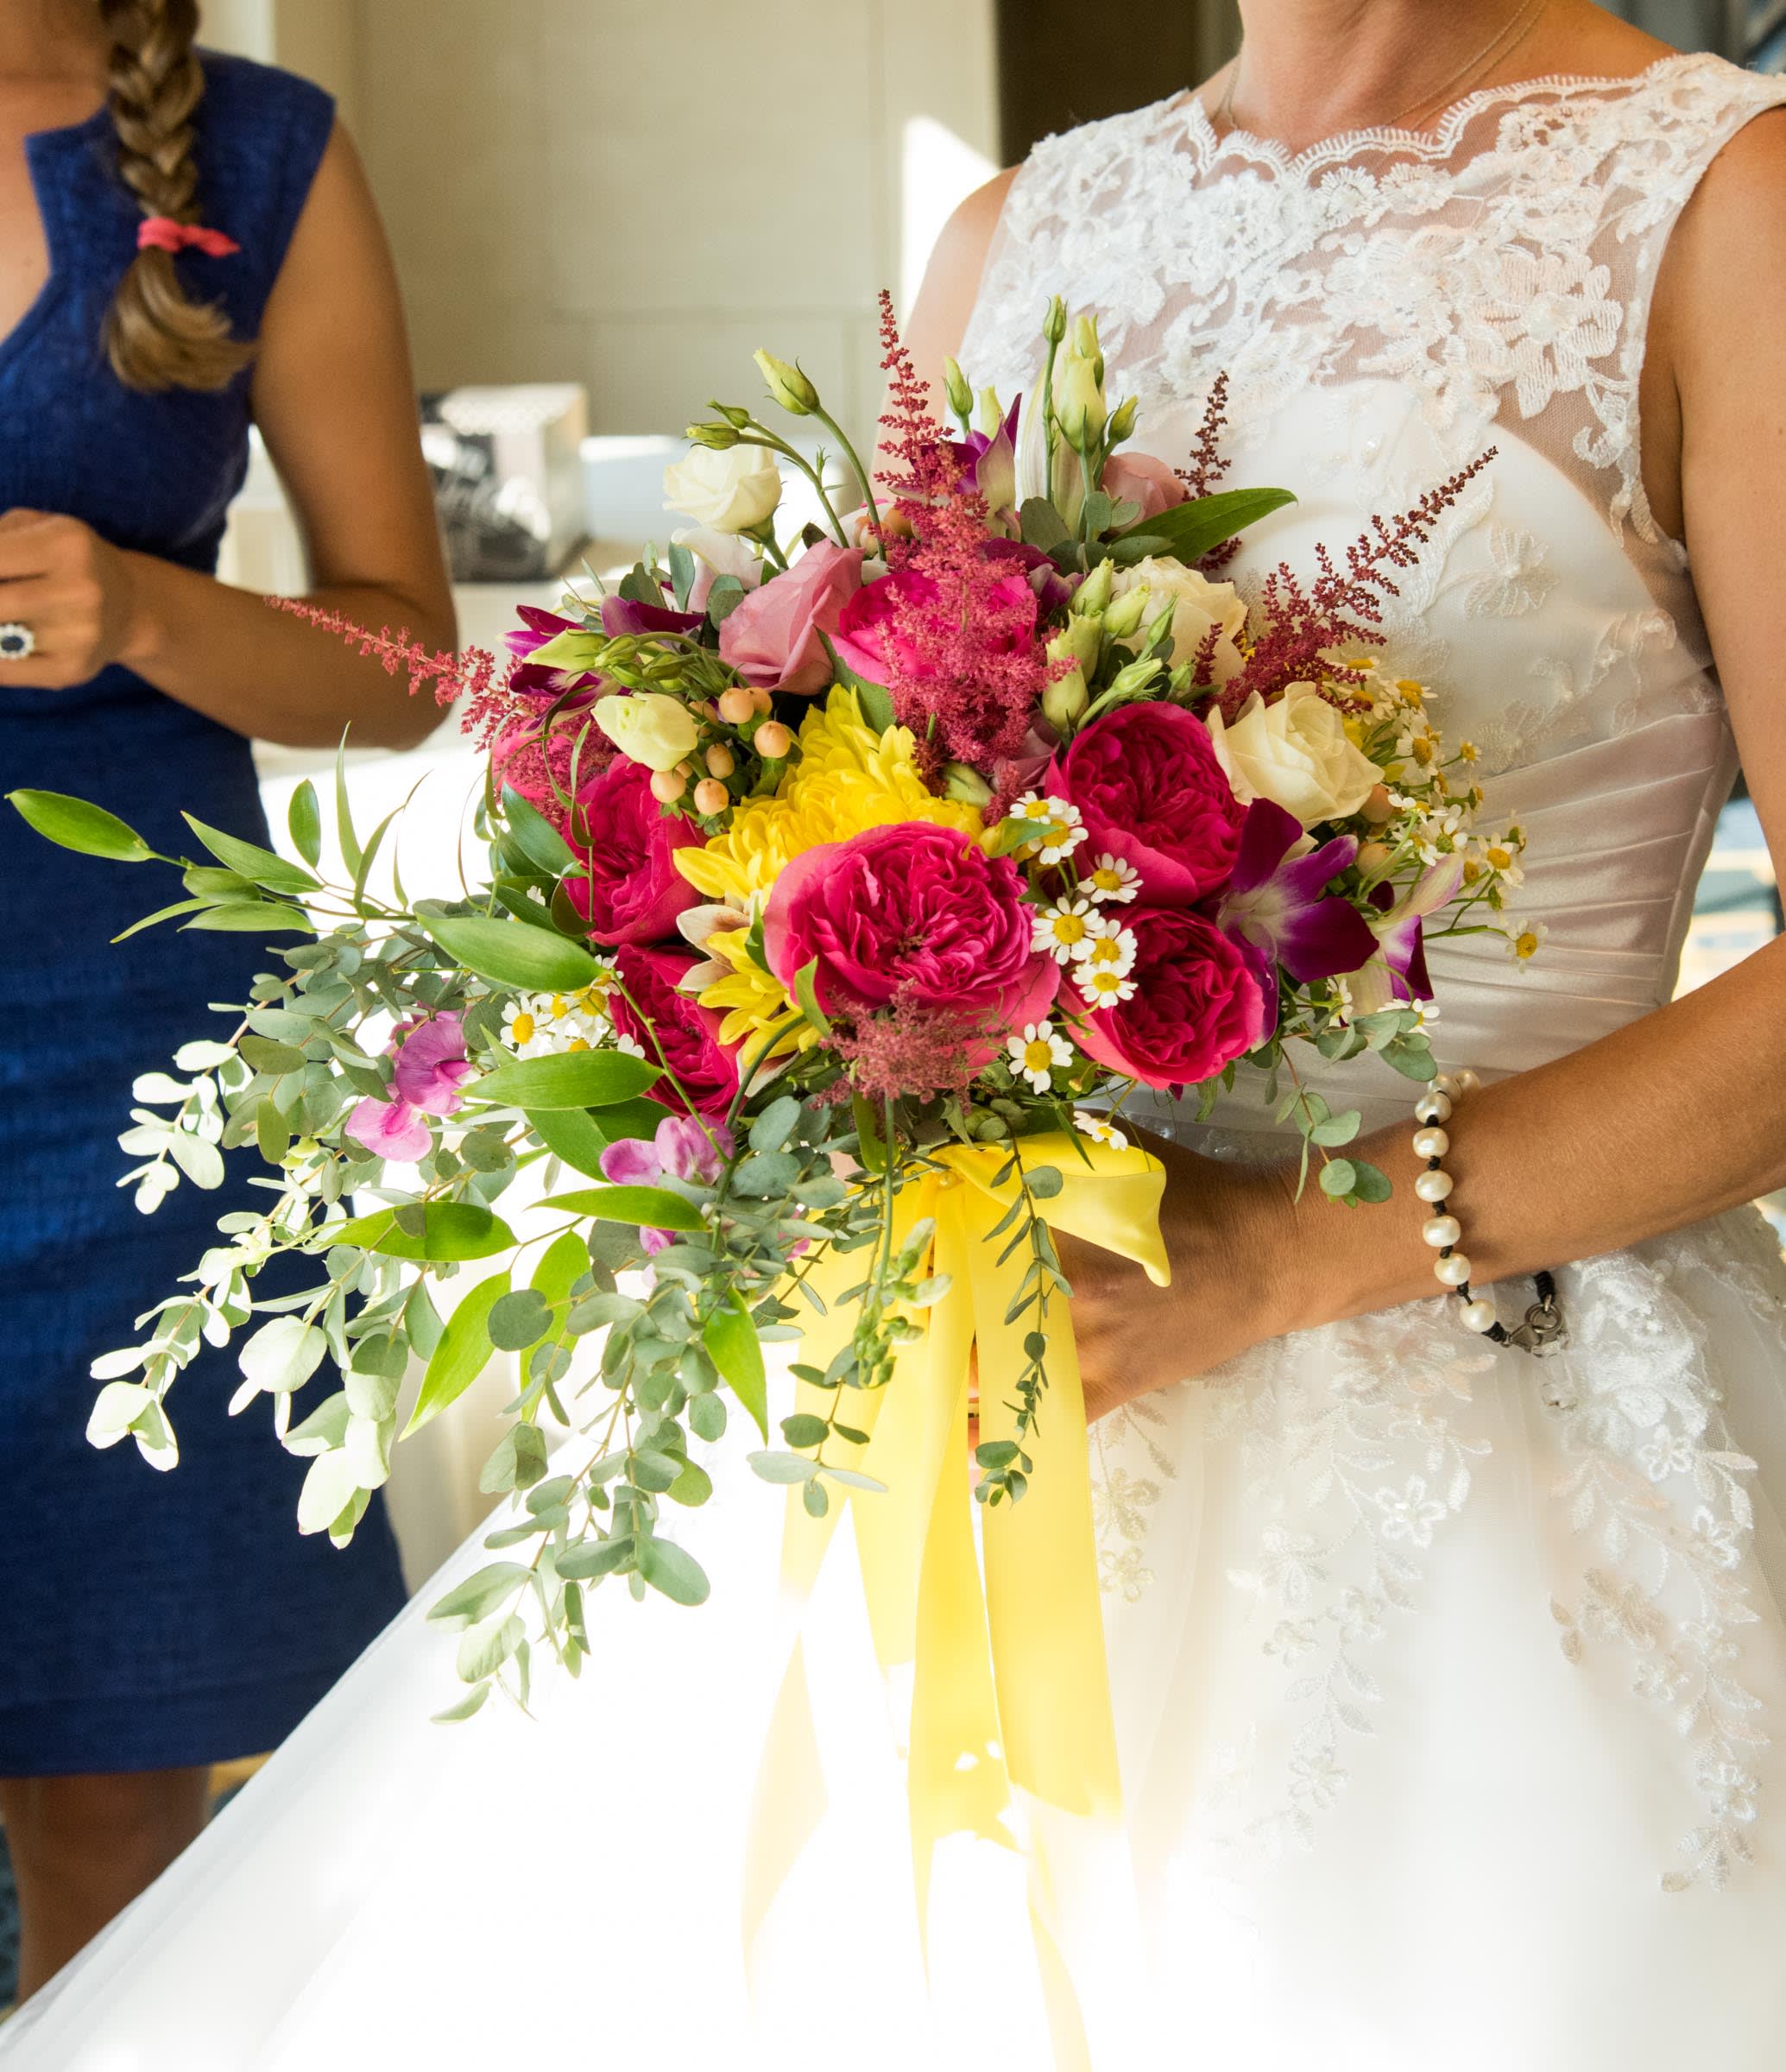 The Dazzling Bridal Bouquet - Pink Floyd Roses, Astilbe, Yellow Cremone, Fever Few Daisies, Baronesse Garden Roses accompanied by assorted eucalyptus create this gorgeous bridal bouquet hand tied with canary yellow ribbon.  Call us or email us directly to schedule your consultation. 